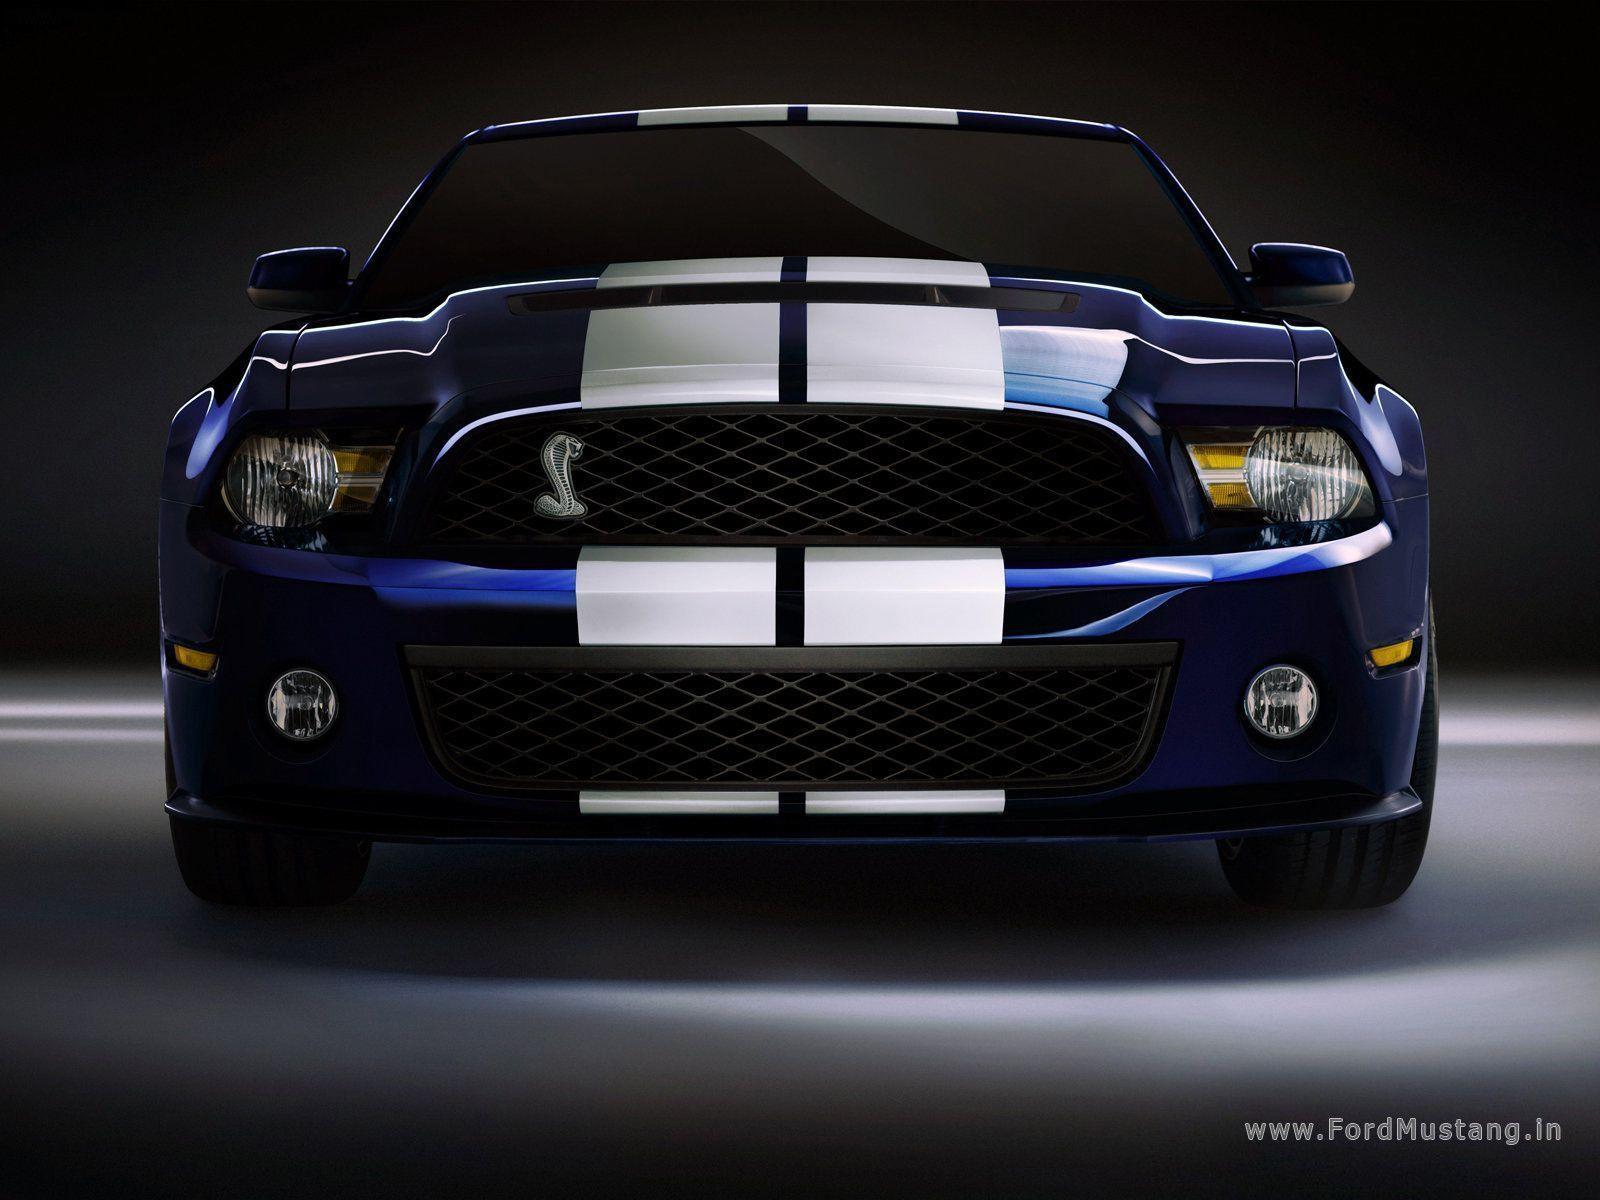 Ford Mustang Shelby GT500 (2010) Wallpaper. Ford Mustang, Ford